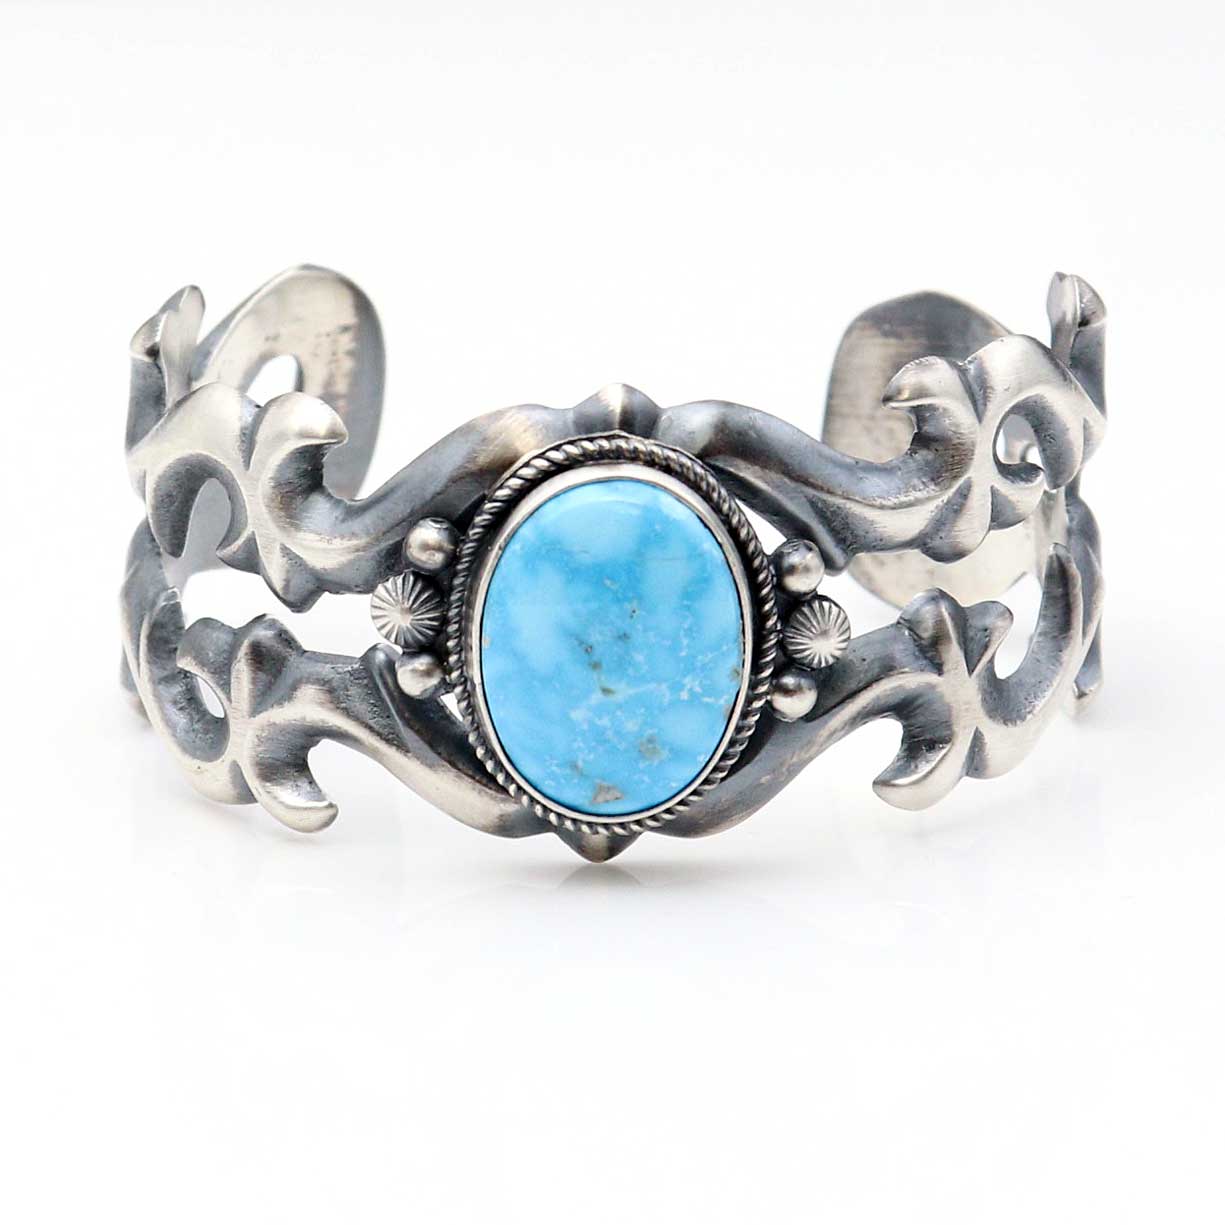 Load image into Gallery viewer, Natural Kingman Birds Eye Turquoise Bracelet by Bitsui
